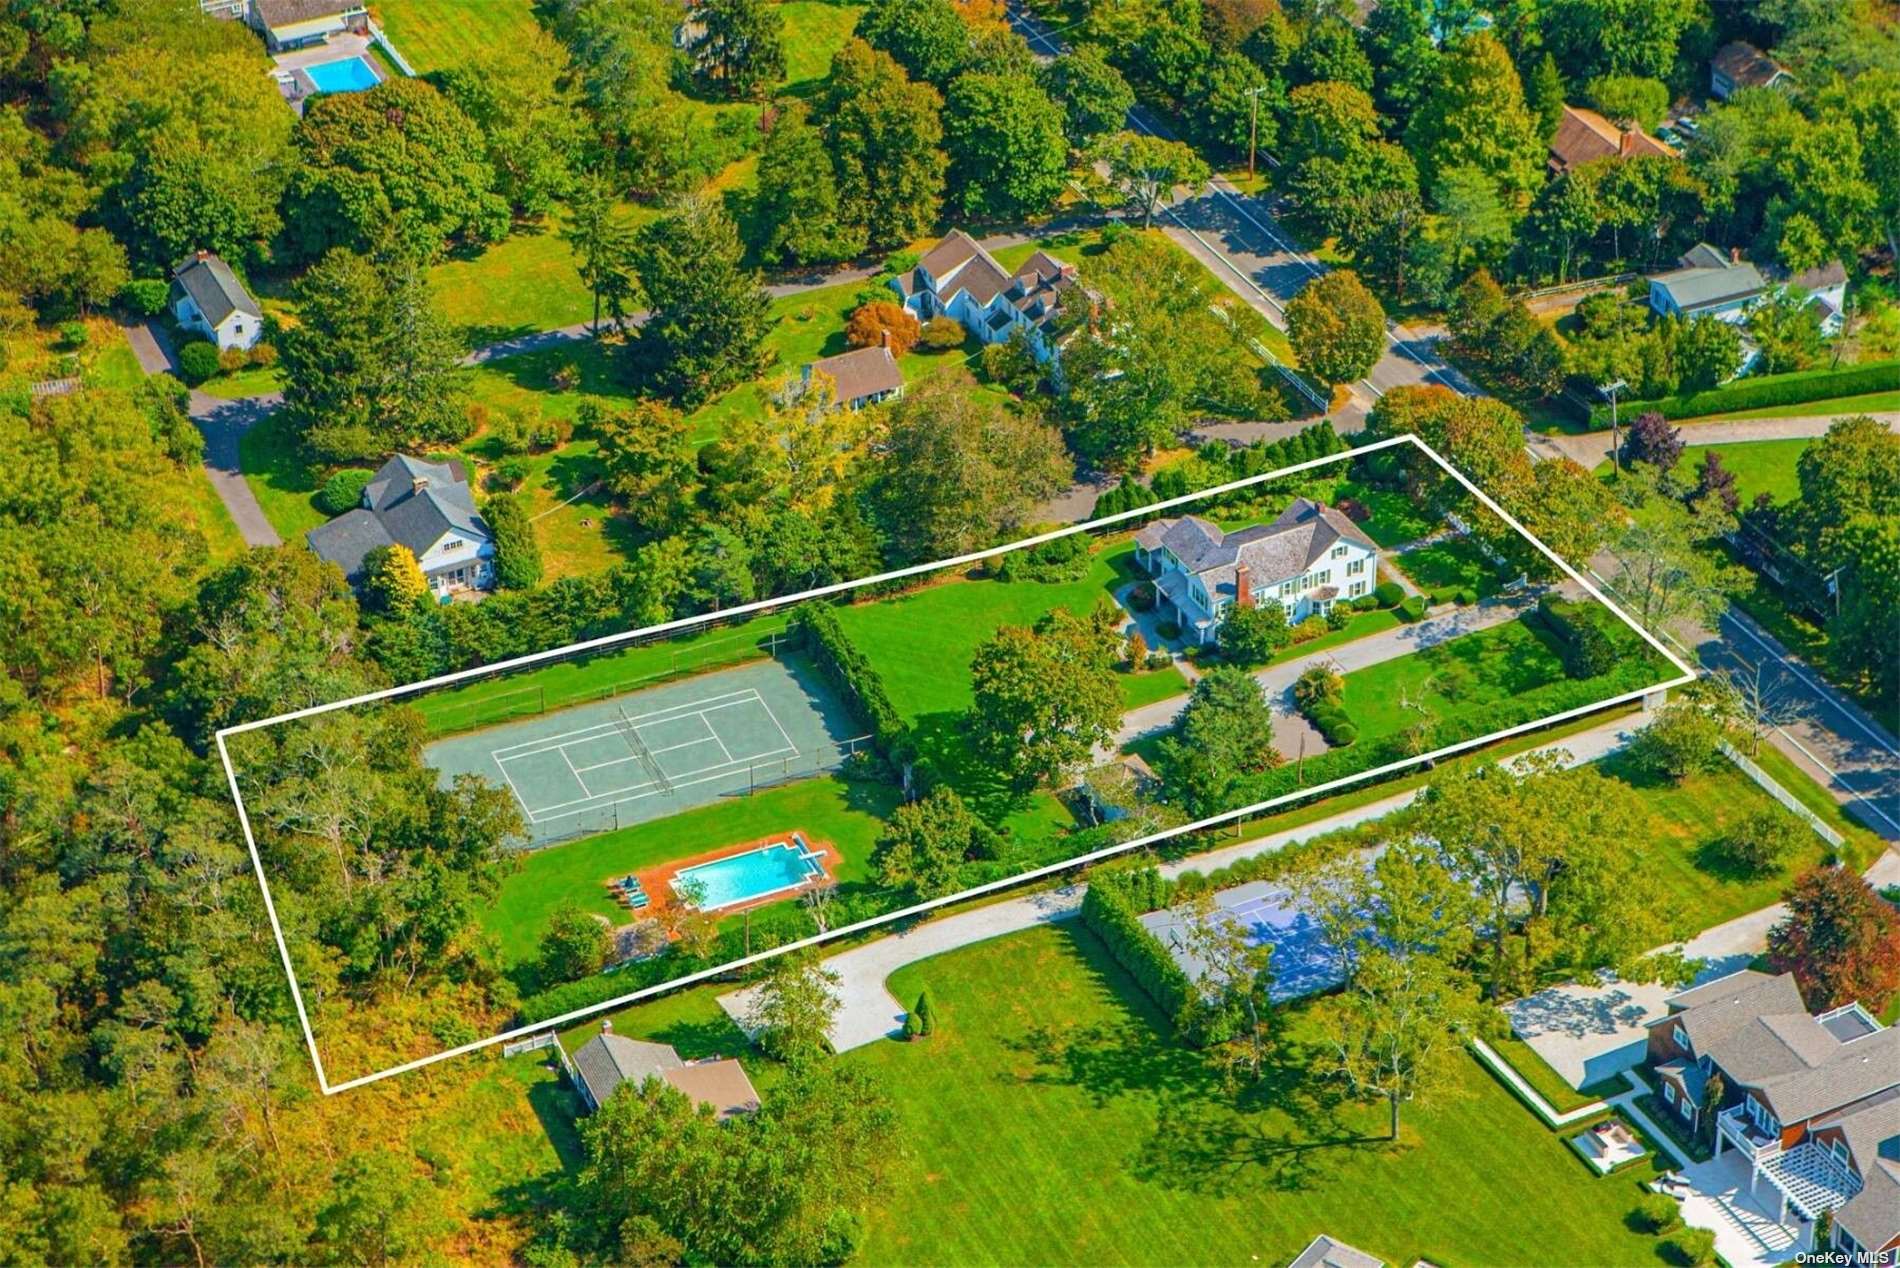 118 South Country Road, Remsenburg, Hamptons, NY - 4 Bedrooms  
4 Bathrooms - 